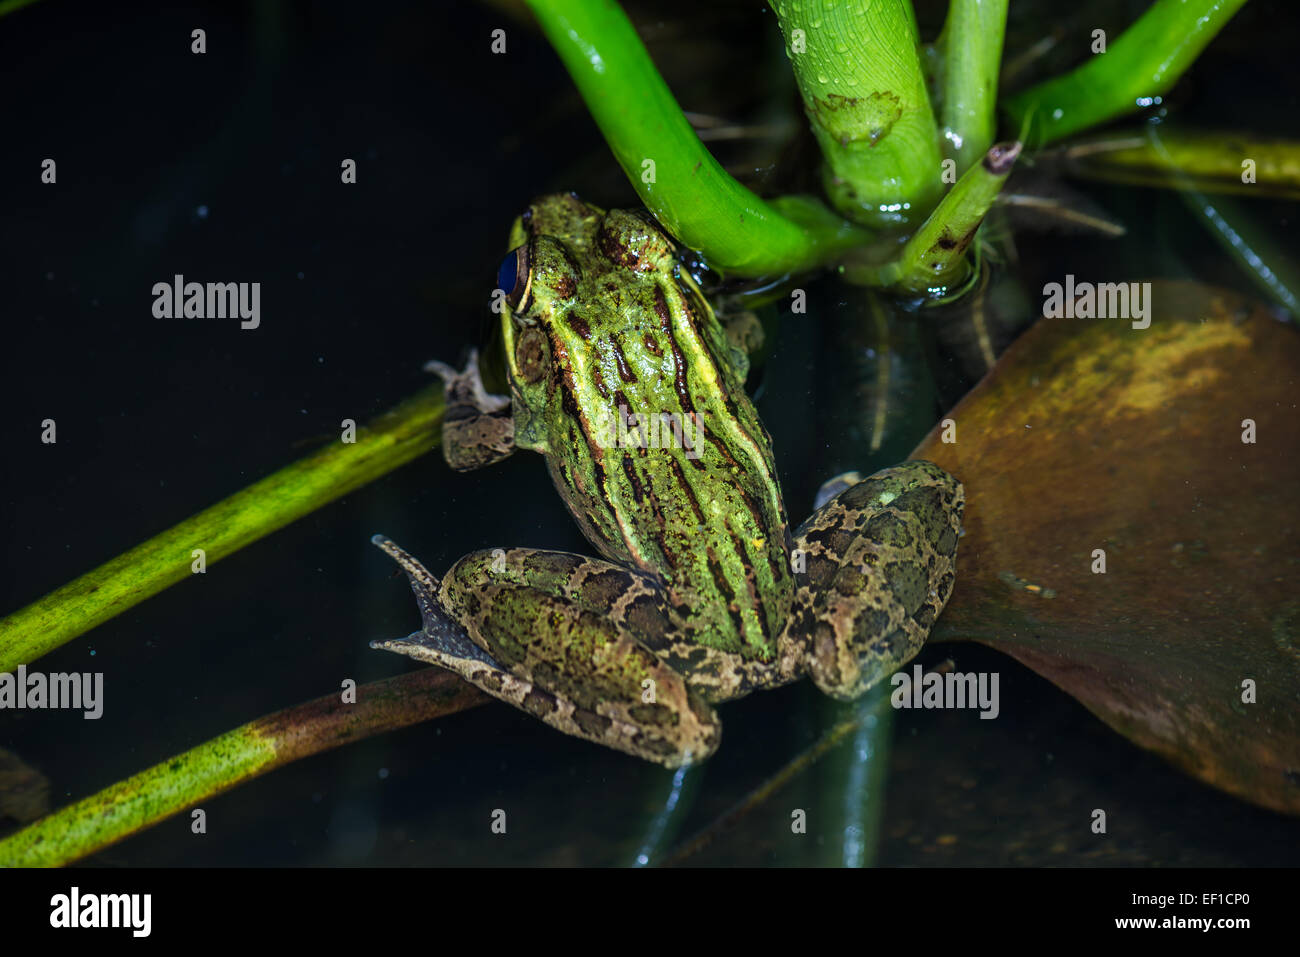 Green frog in water. Belize, Central America. Stock Photo